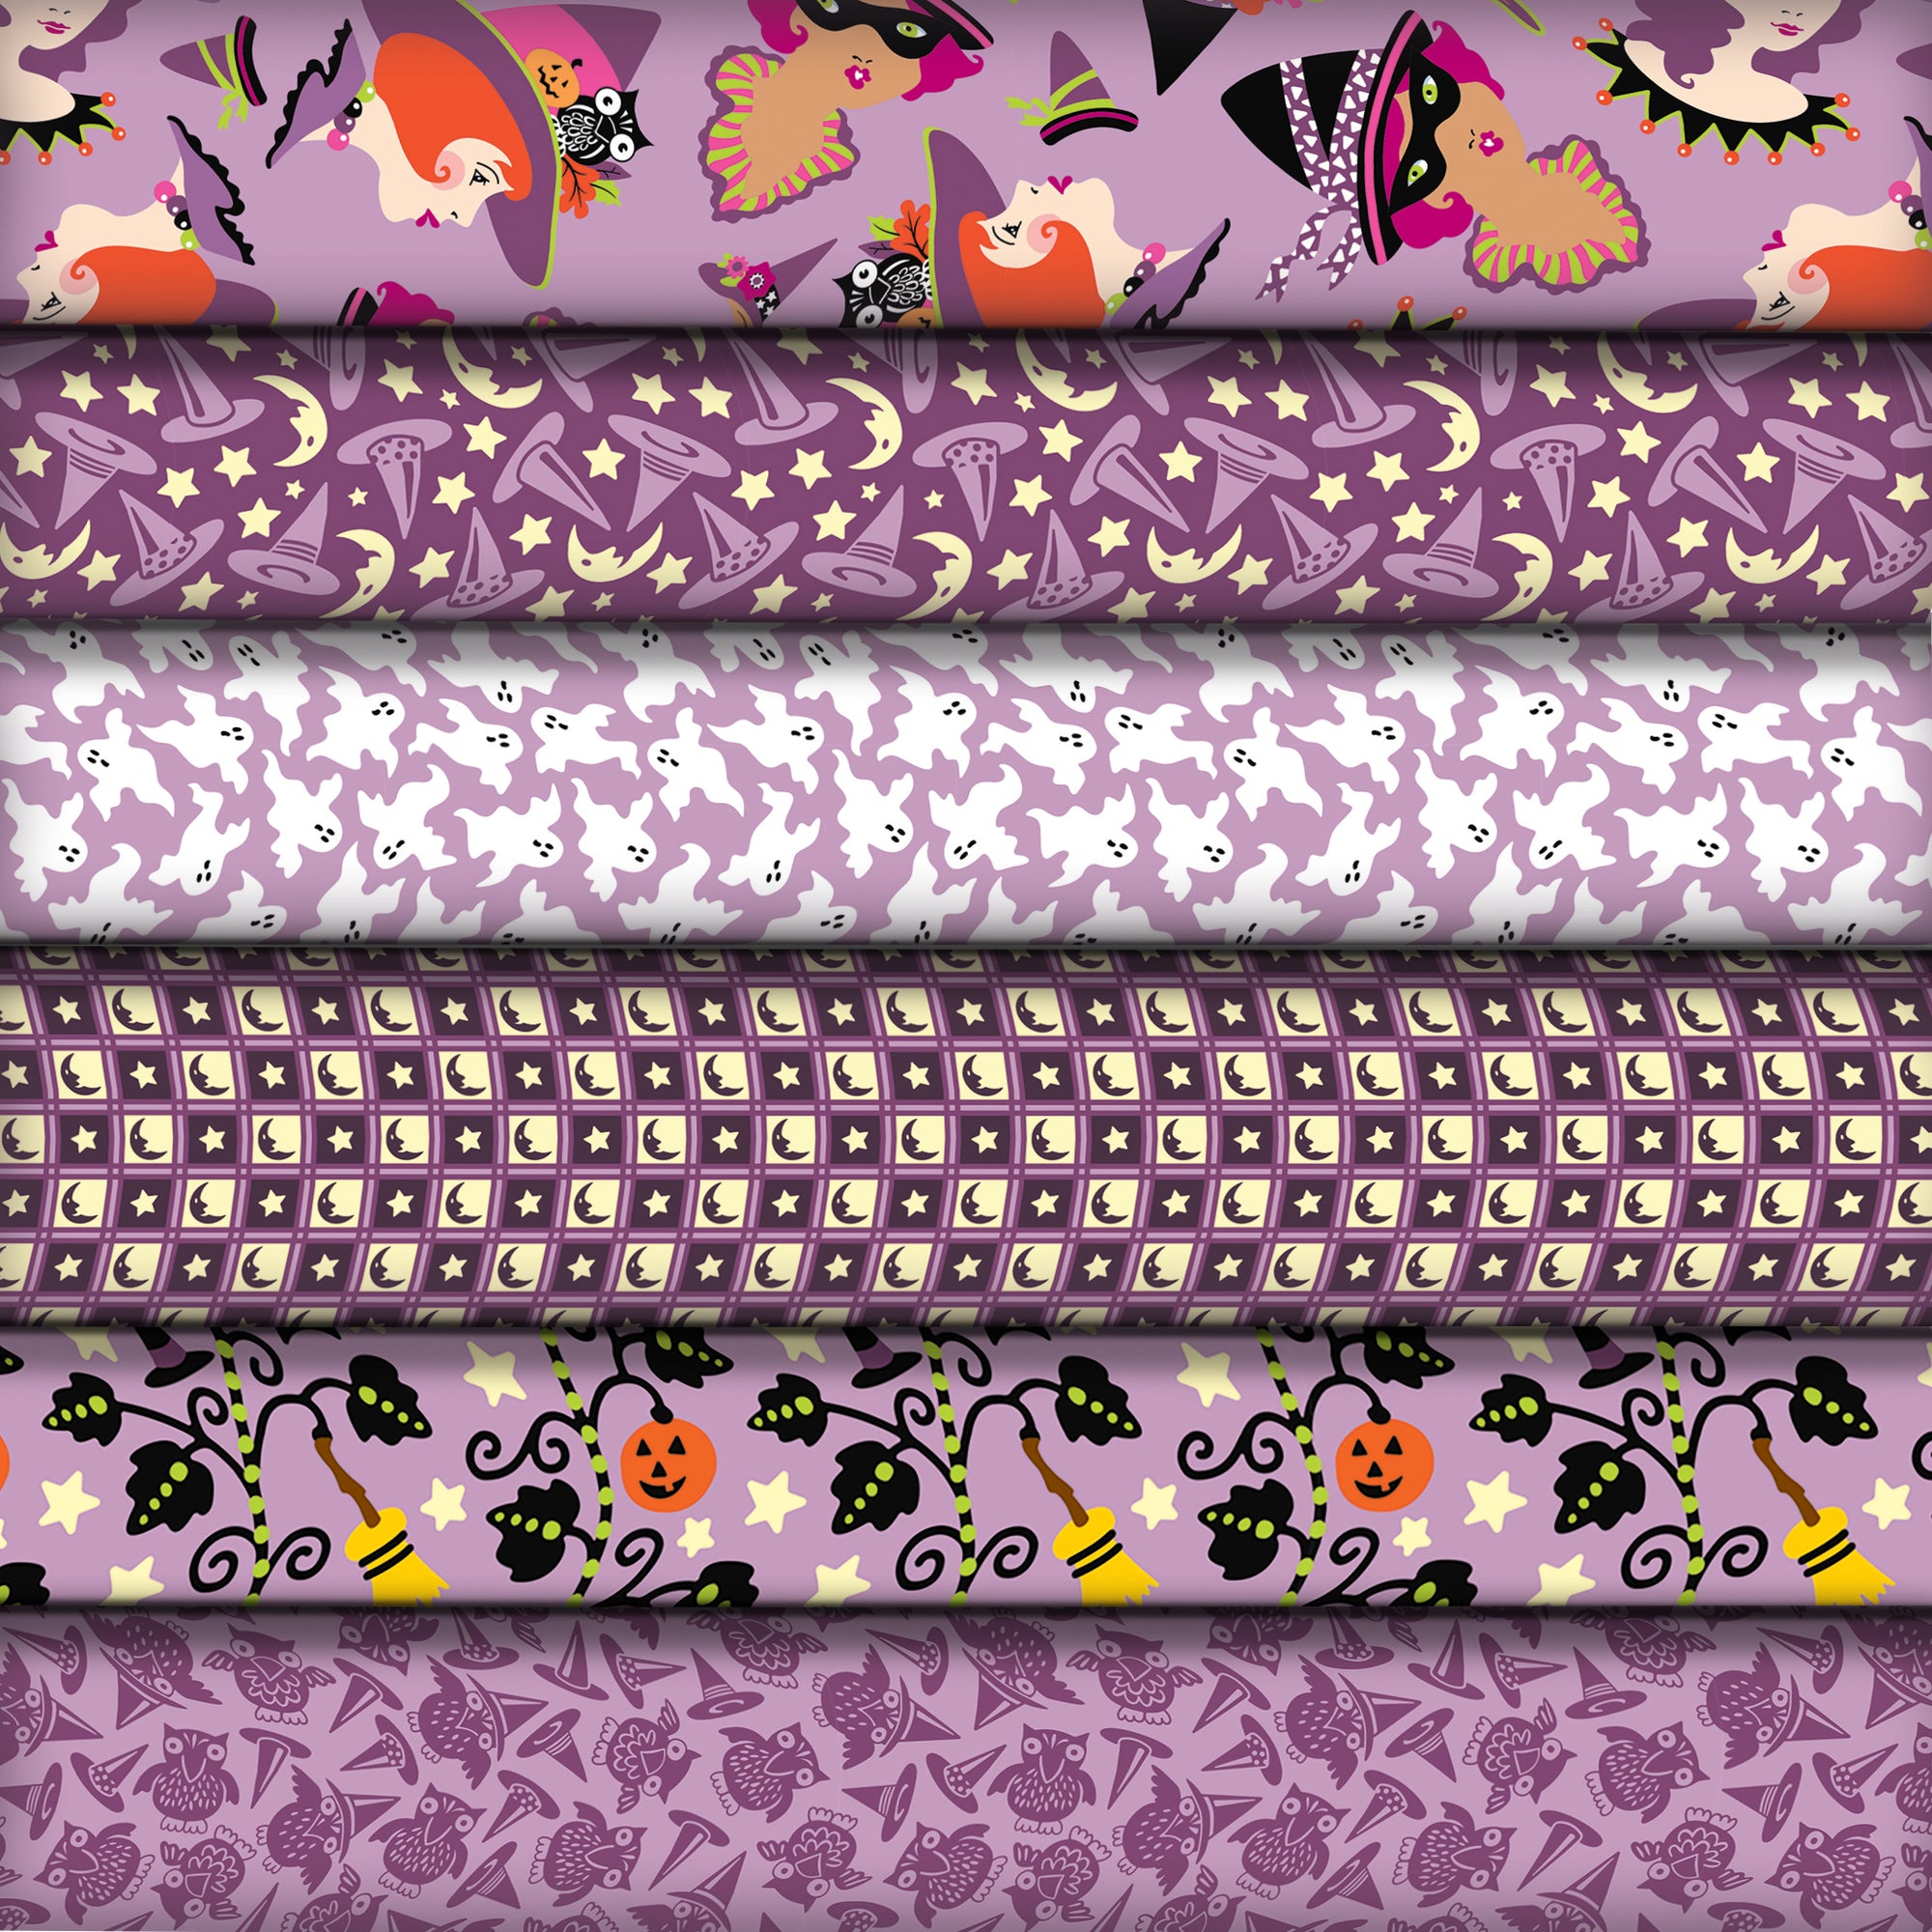 Take Halloween to a Spooktacular Level with These New Mary Engelbreit Textiles